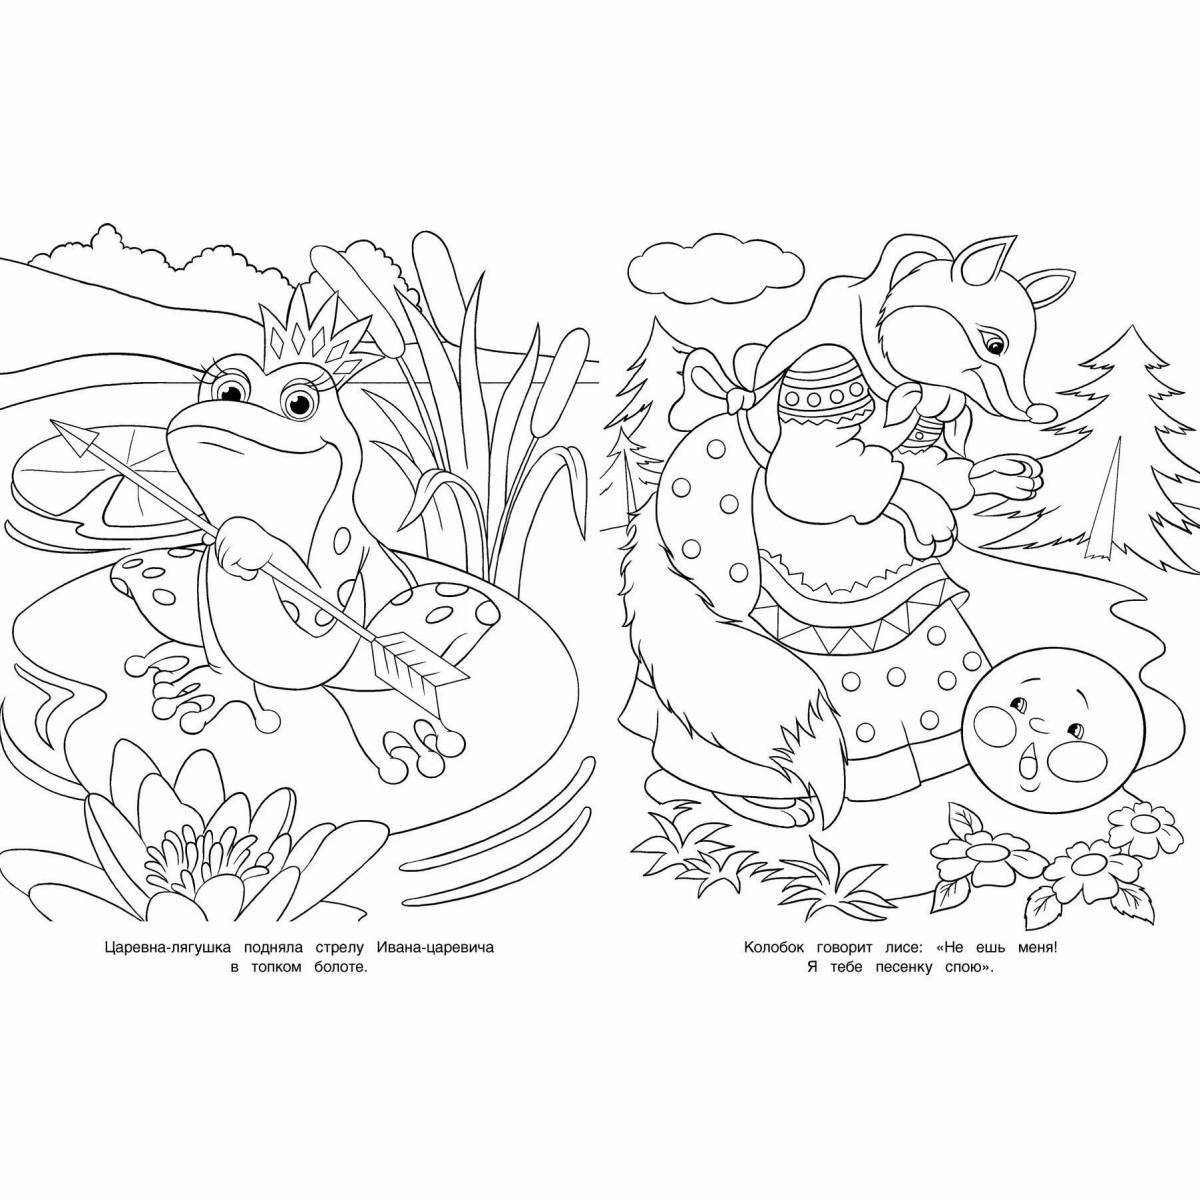 A charming coloring book visiting a fairy tale